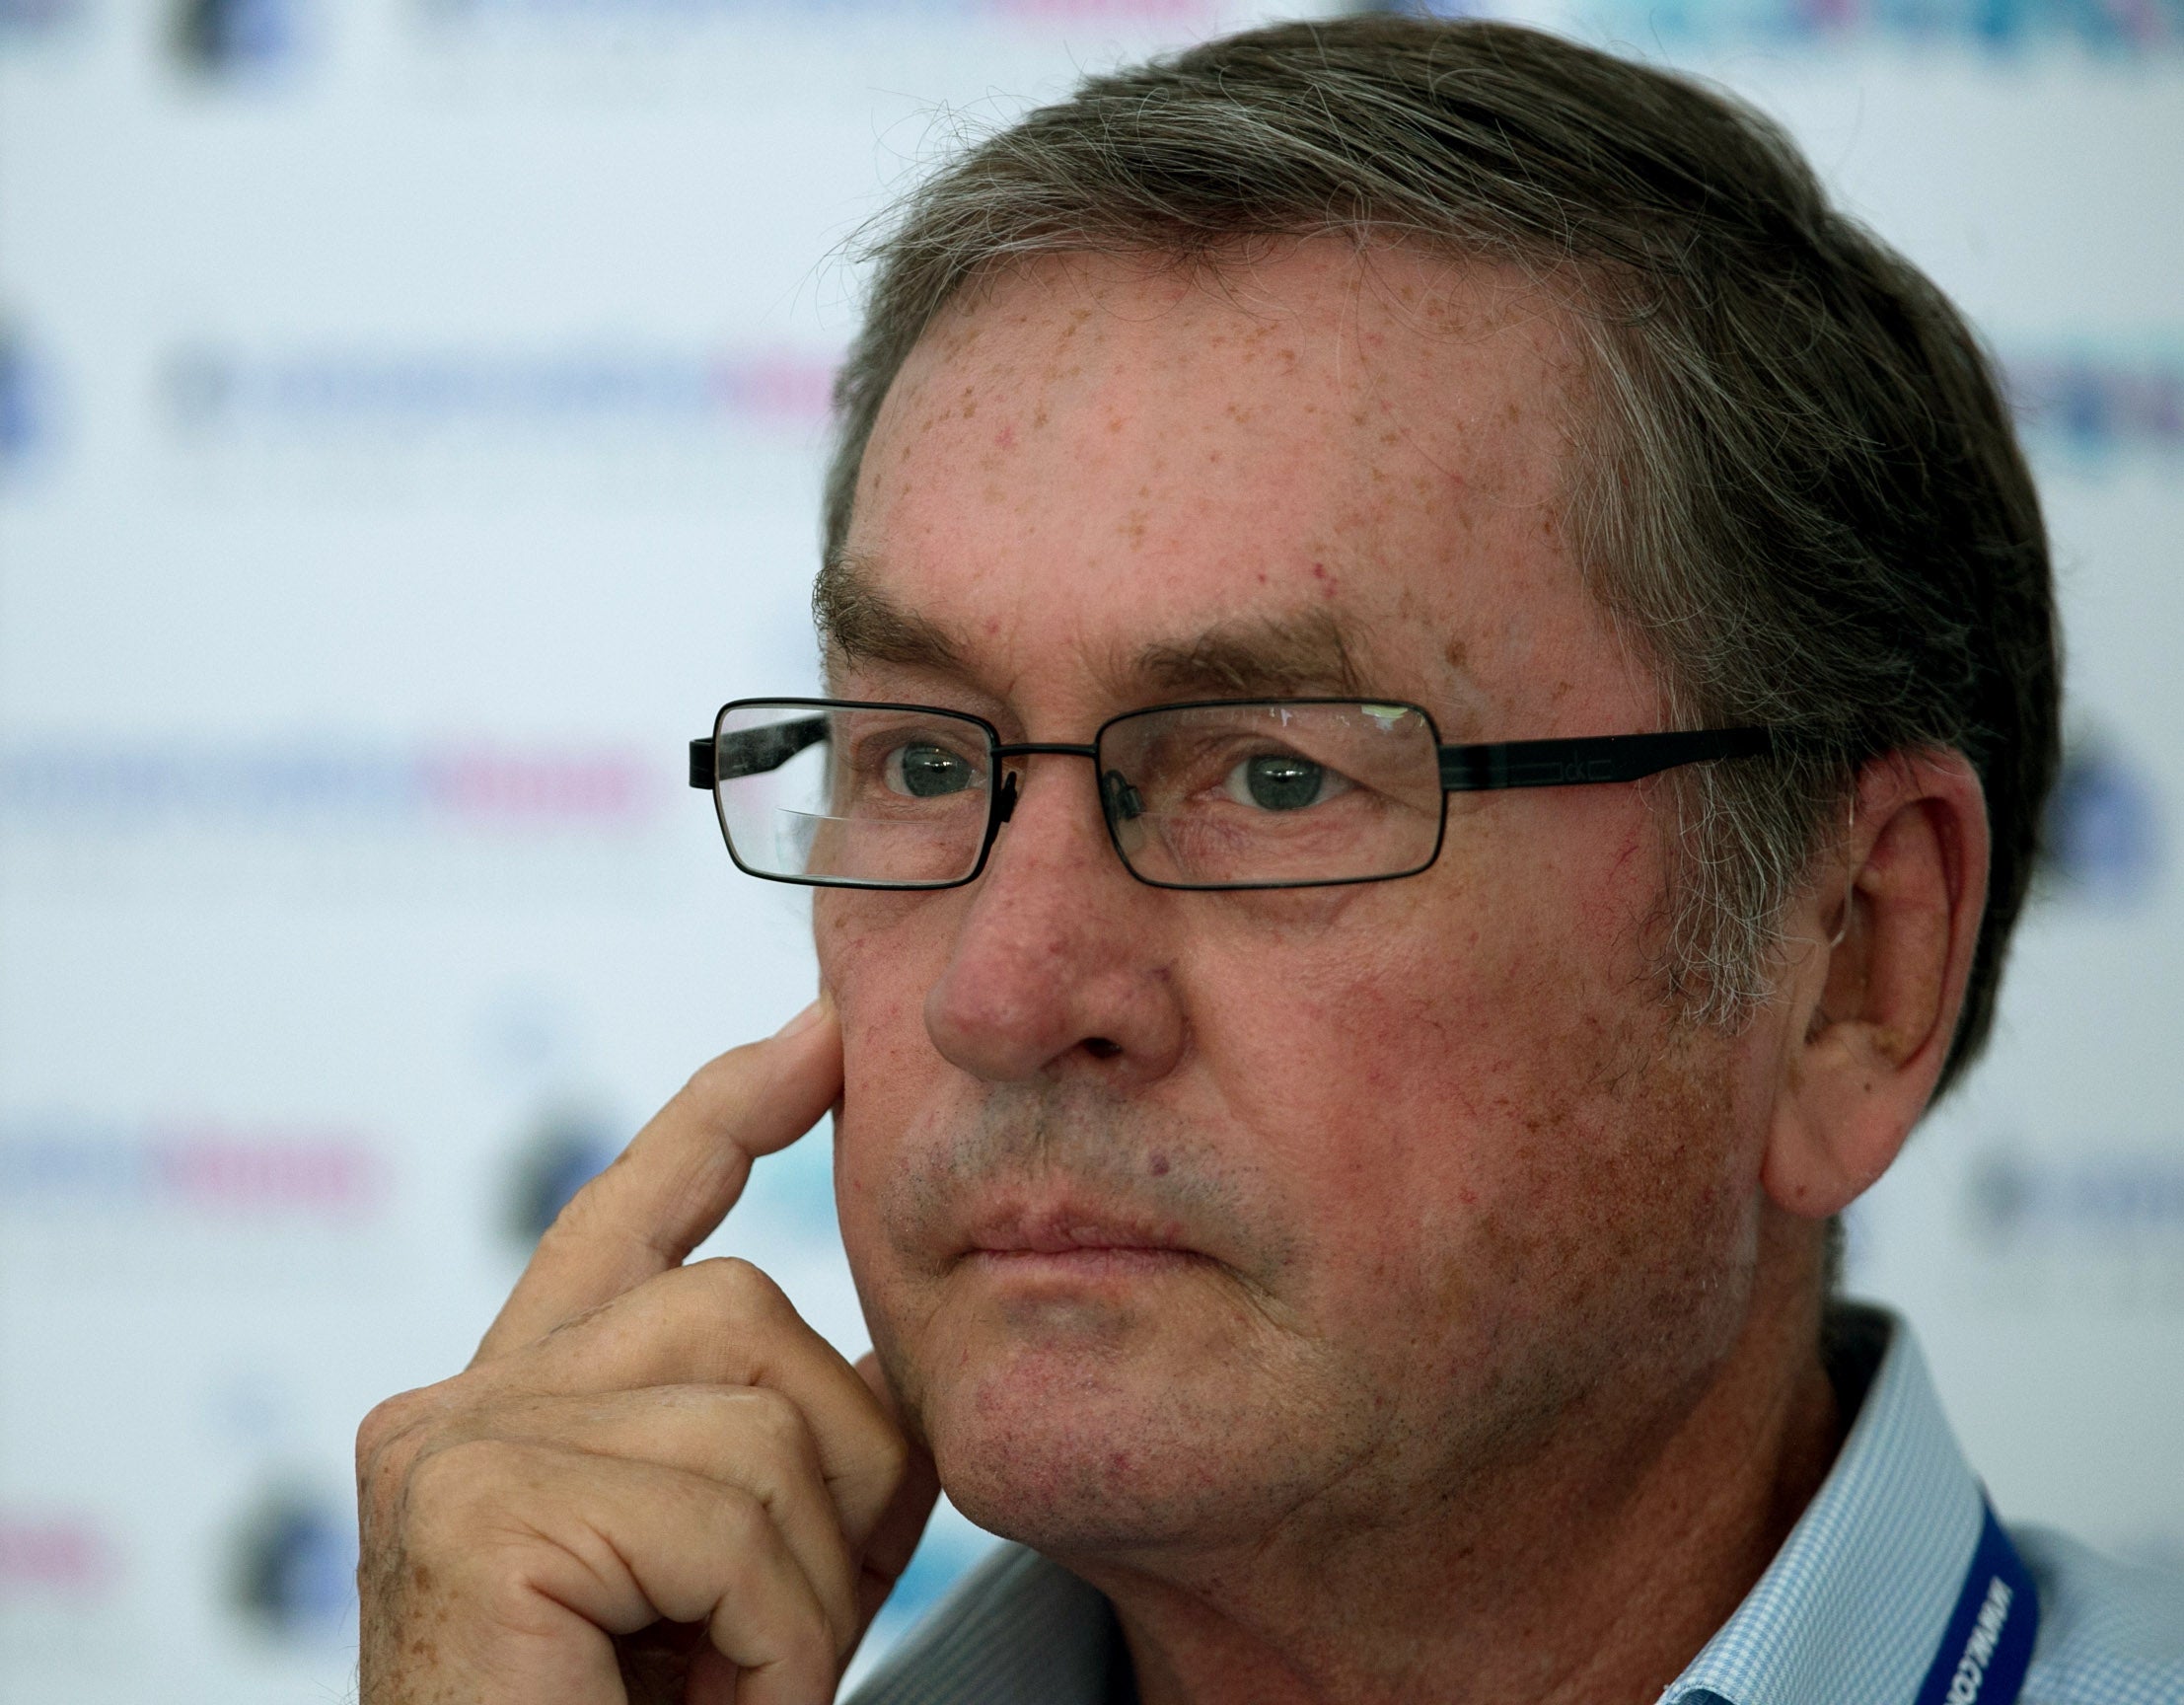 Jasmine Hartin is the estranged partner of Lord Ashcroft’s (pictured) son Andrew Ashcroft